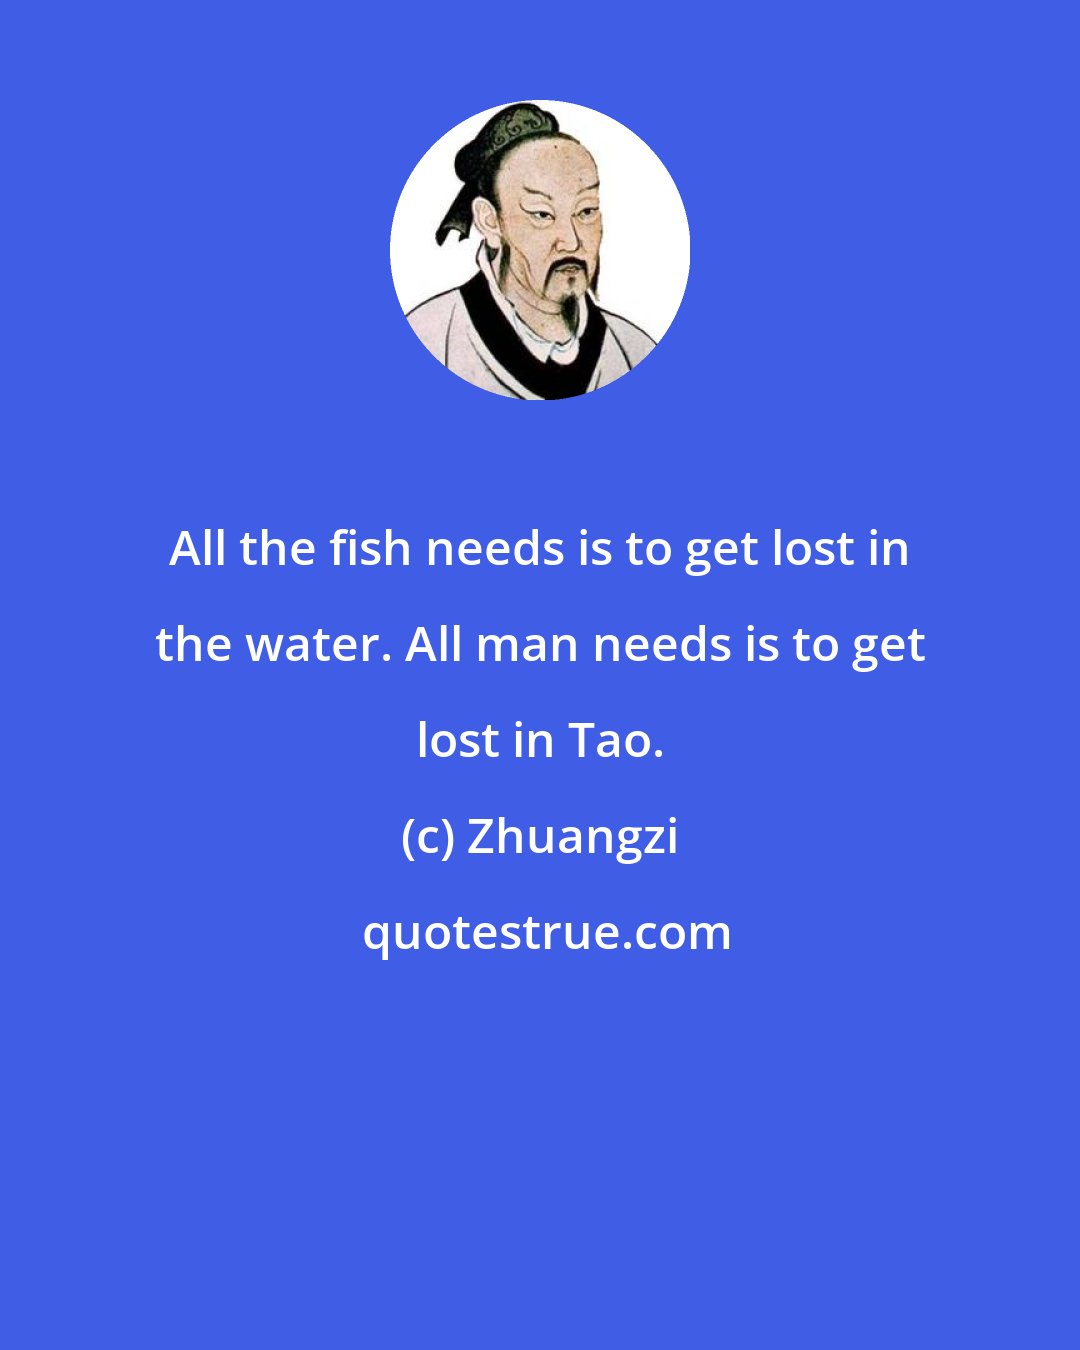 Zhuangzi: All the fish needs is to get lost in the water. All man needs is to get lost in Tao.